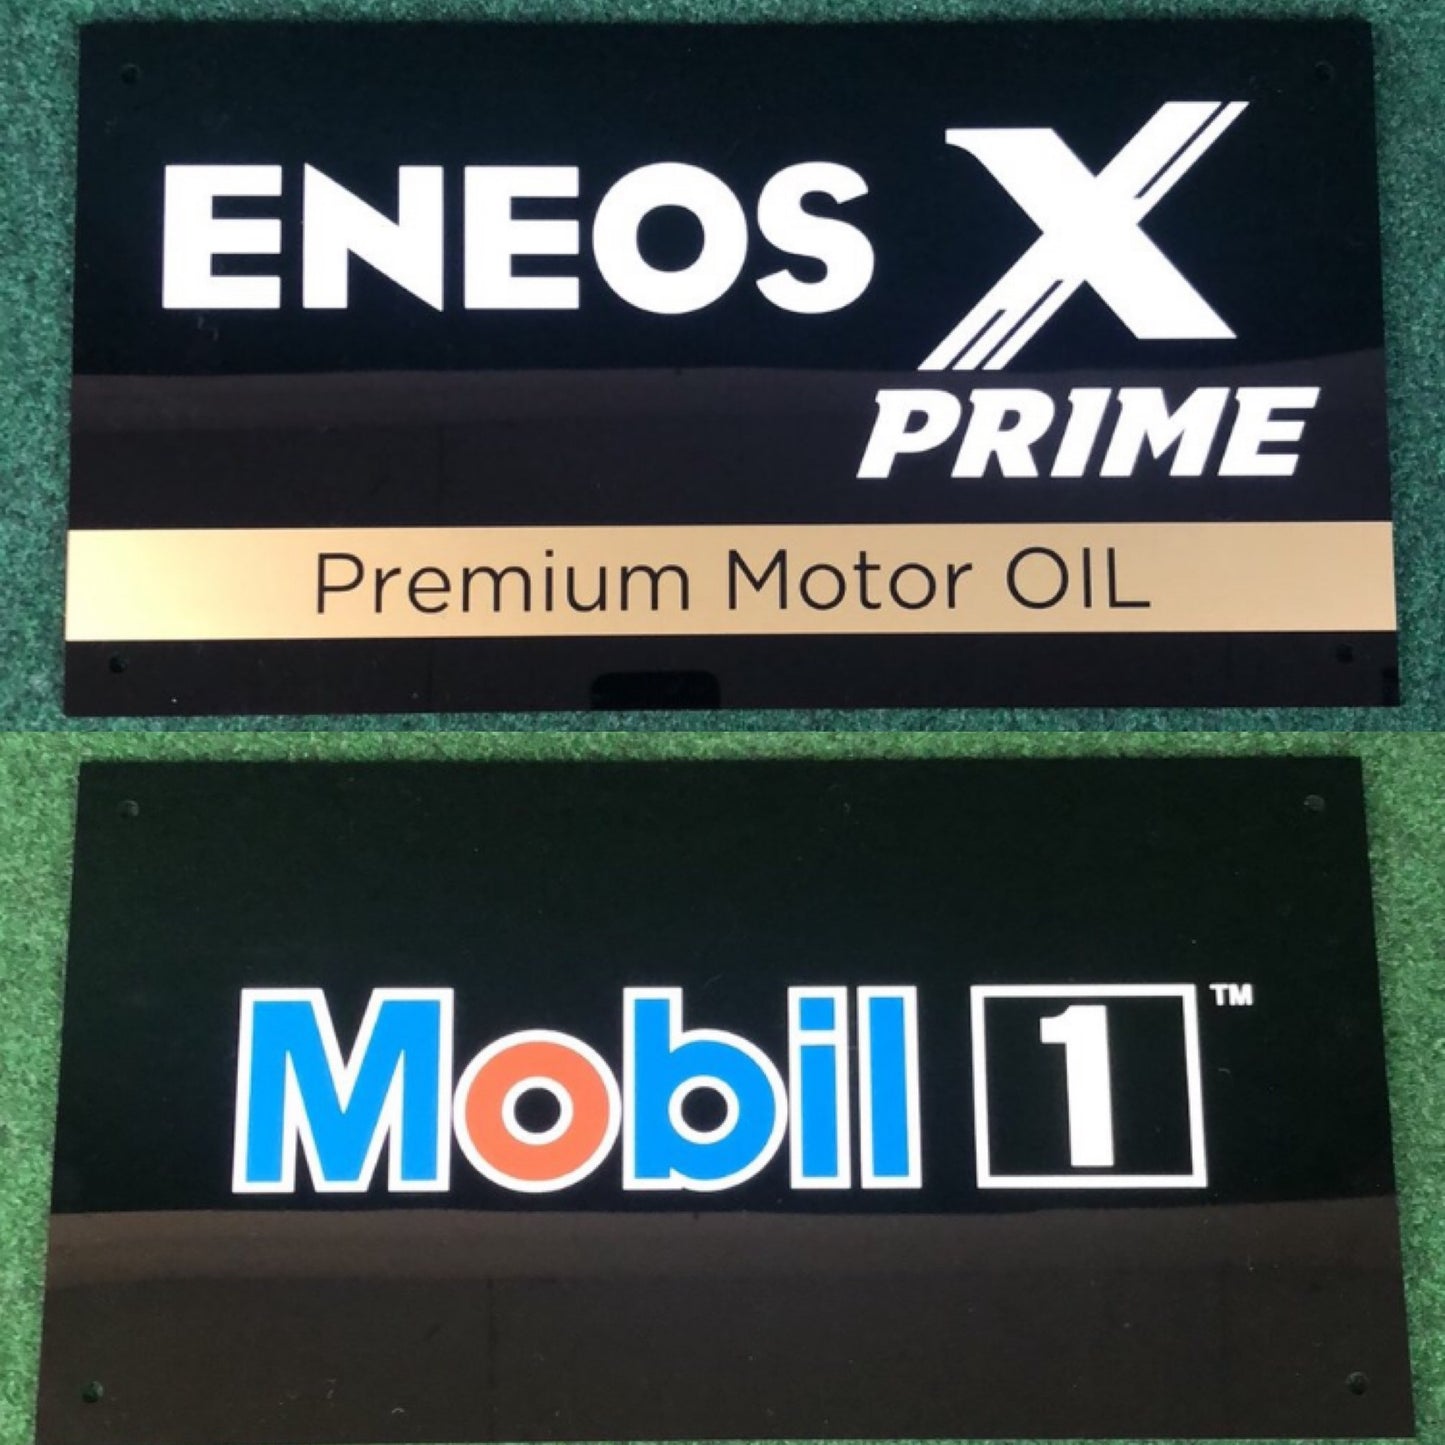 Eneos X Prime Mobil 1 - Dual Sided Retail Display Sign